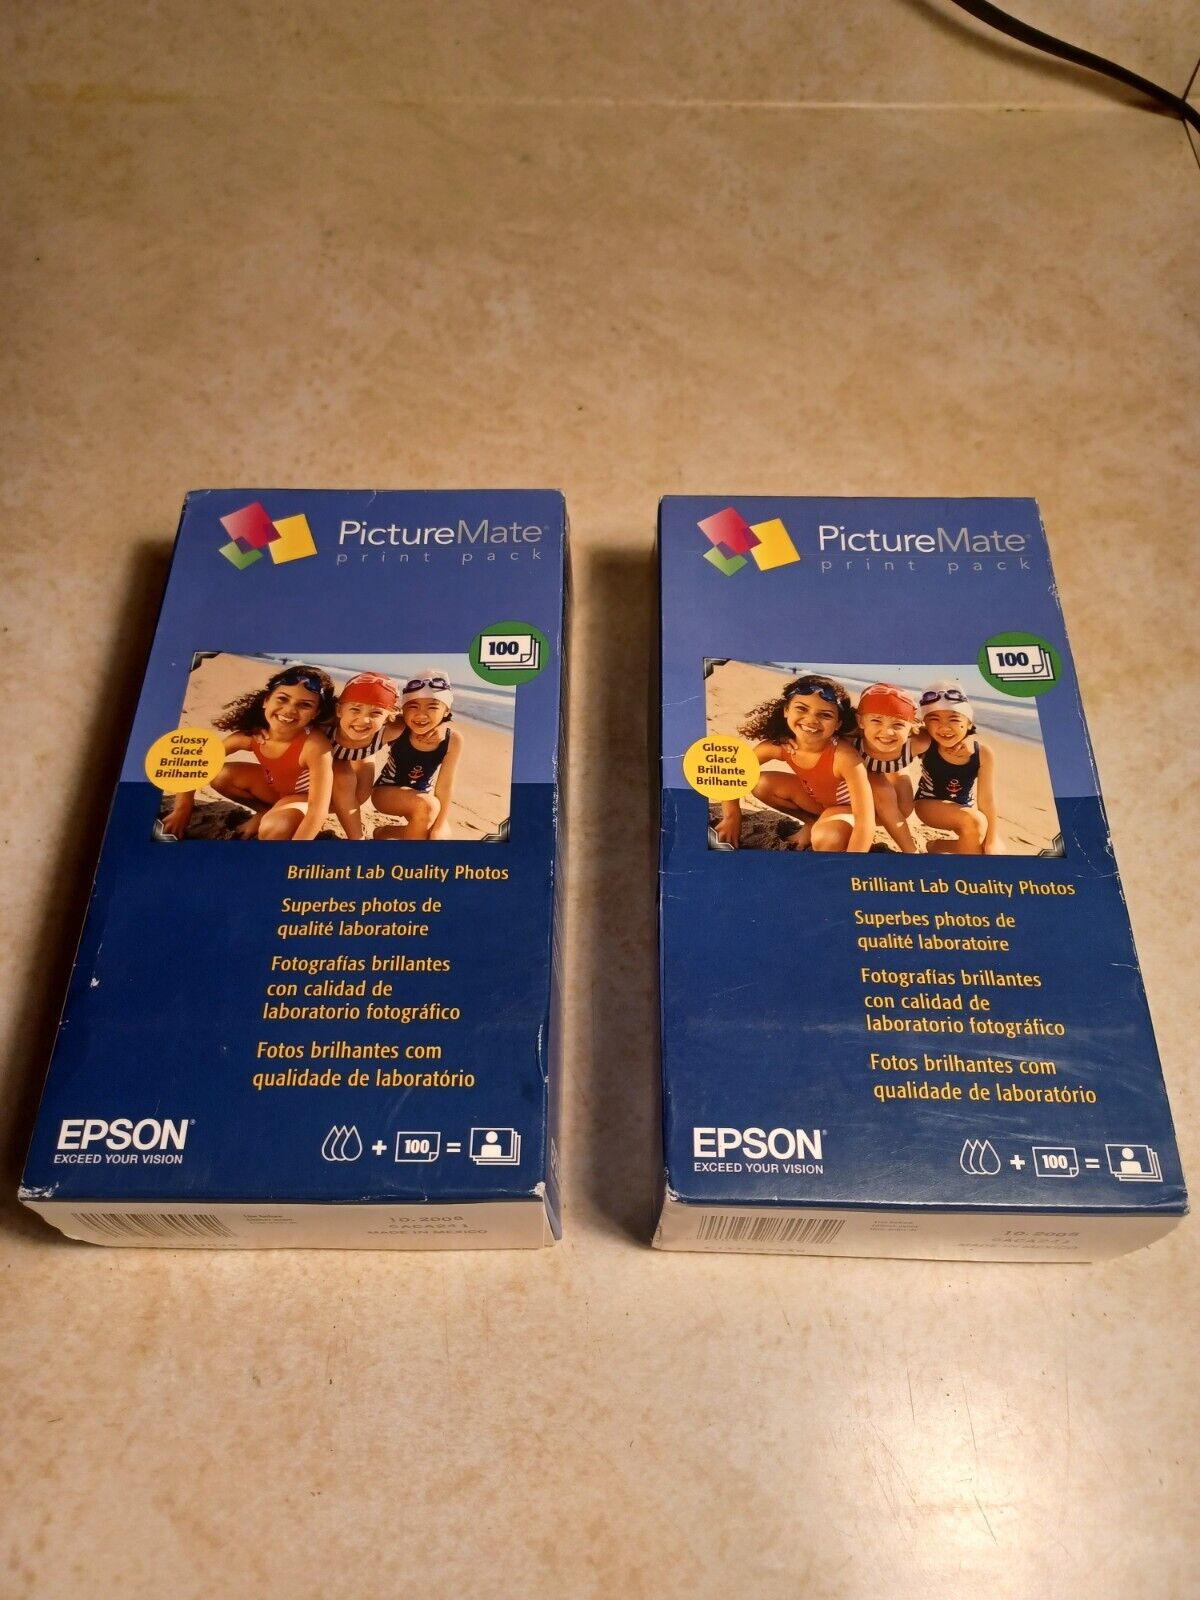 Lot of 2 NEW Epson Picture Mate Print Pack T5570 100 Pack Expired 09/2008